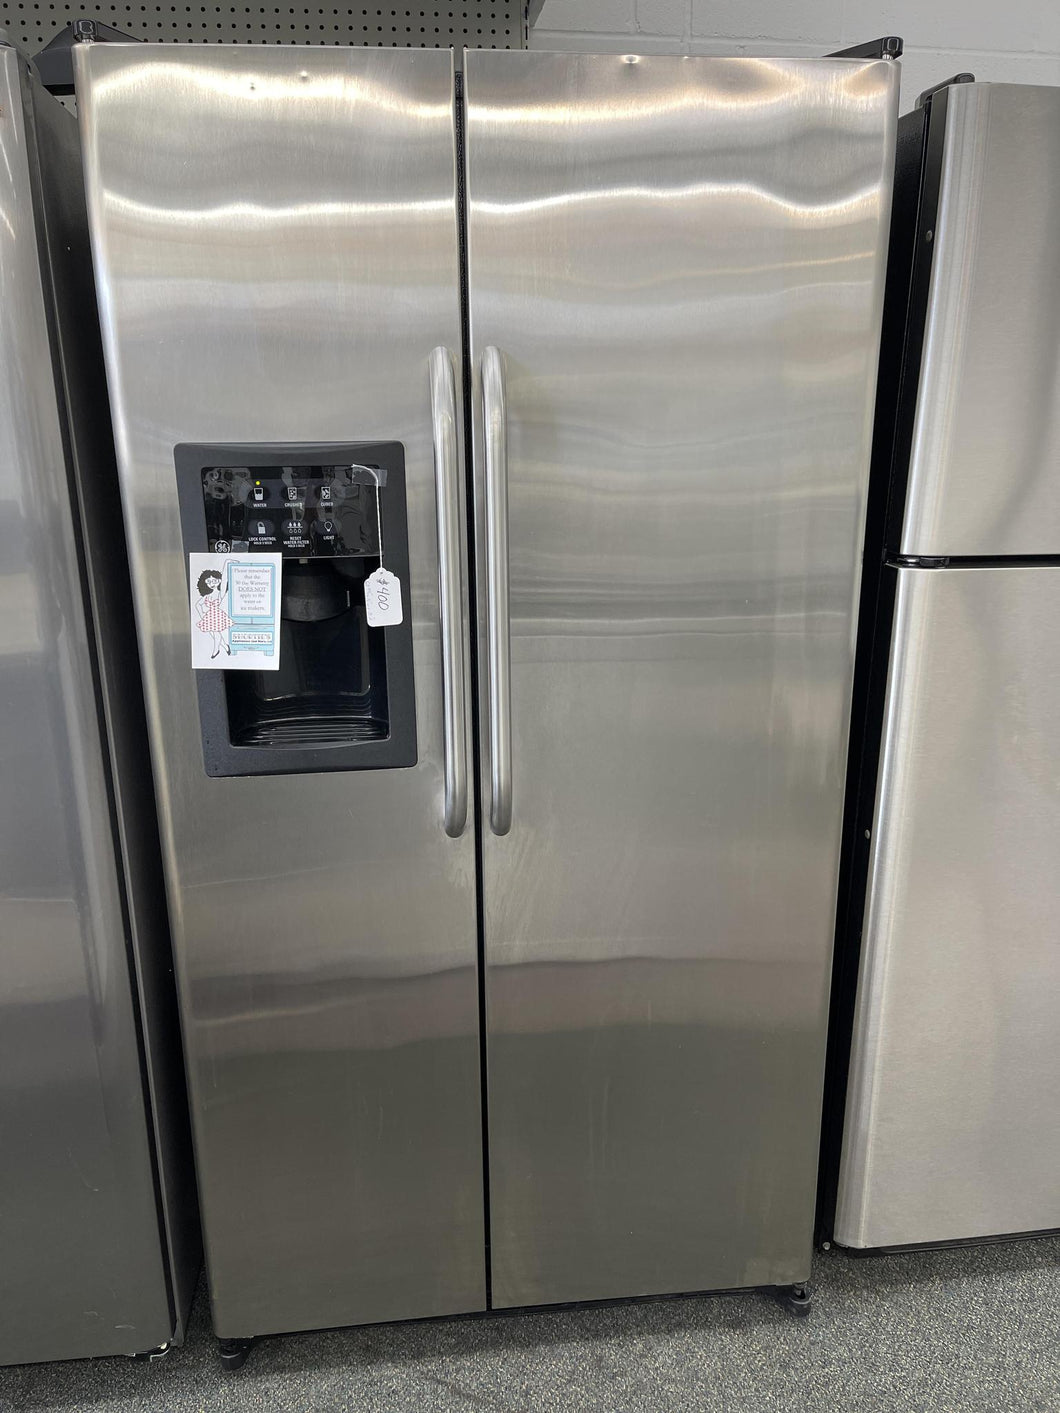 GE Stainless Side by Side Refrigerator - 3932